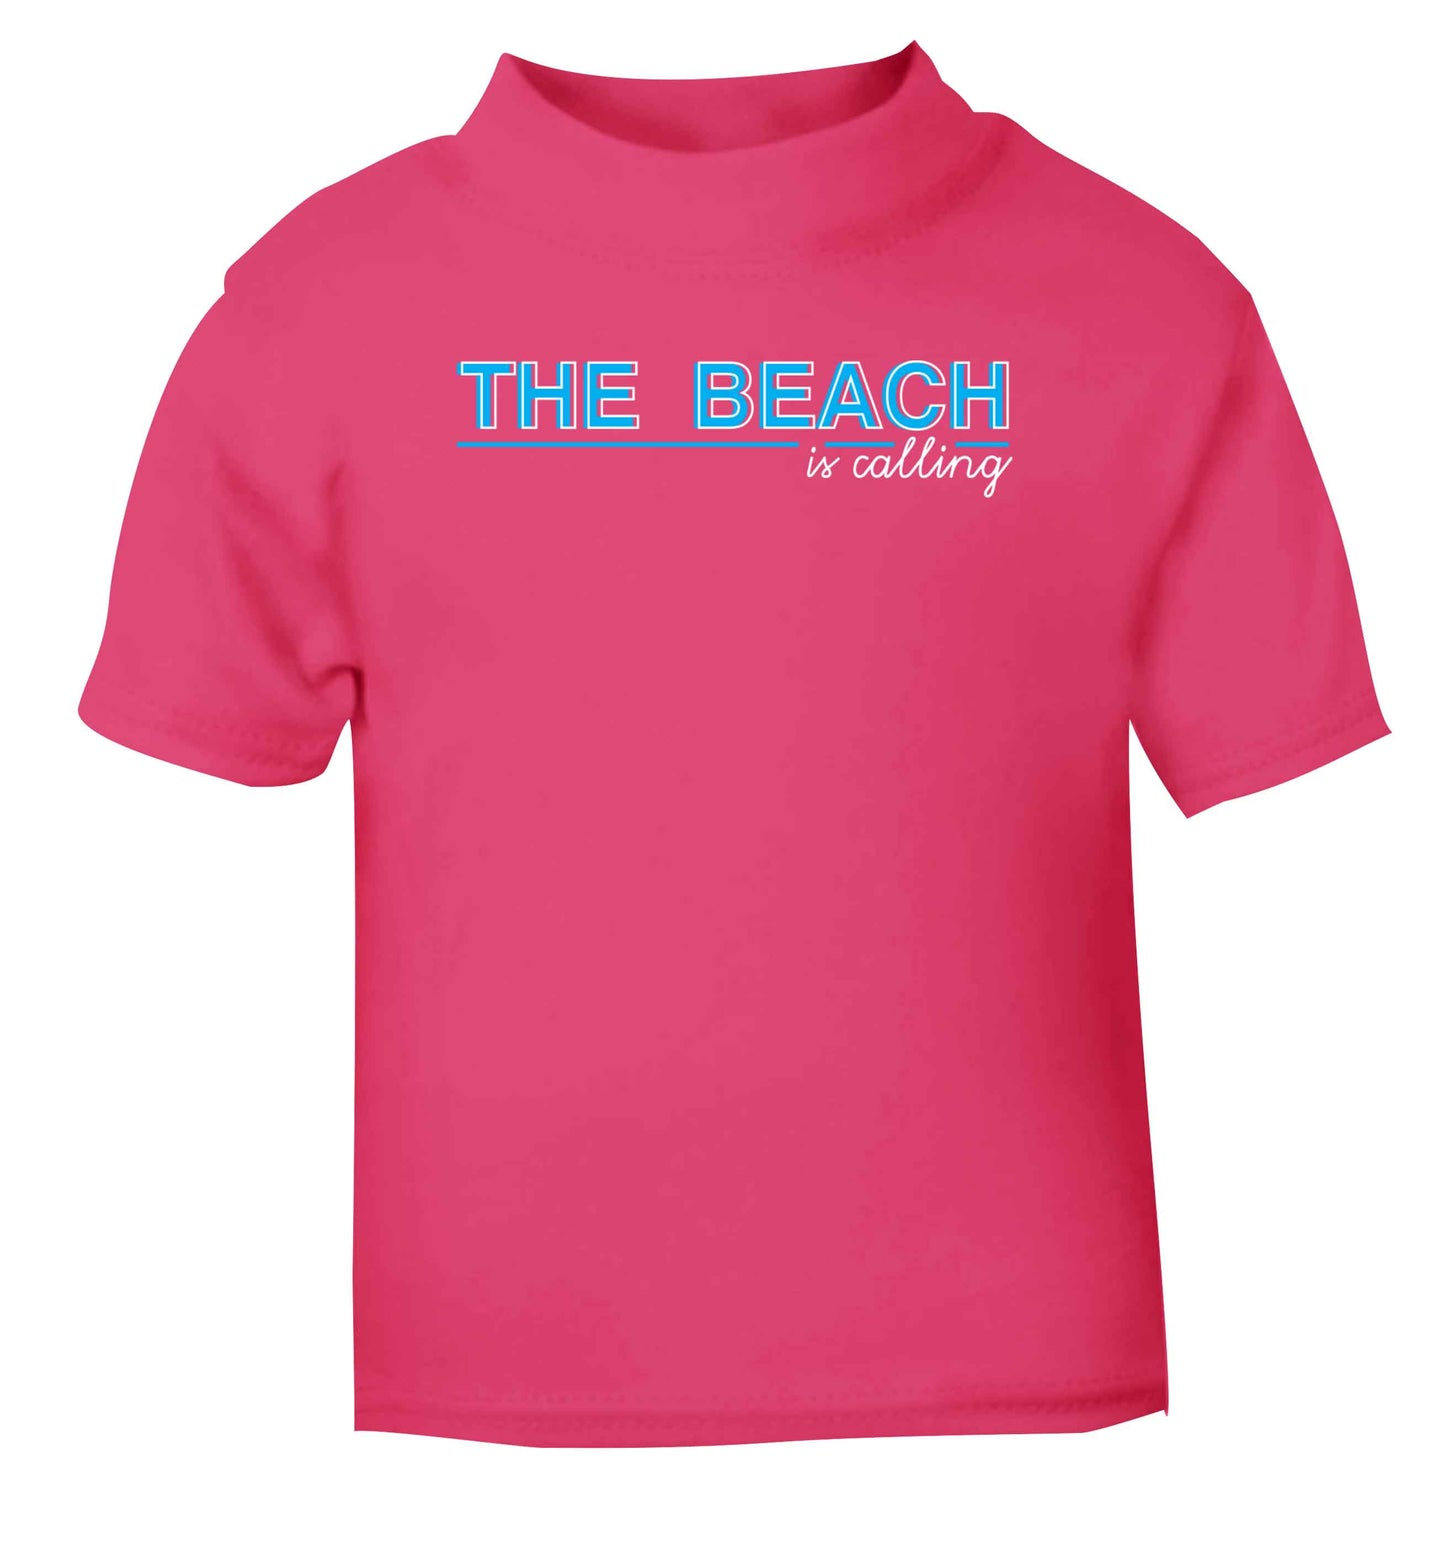 The beach is calling pink Baby Toddler Tshirt 2 Years